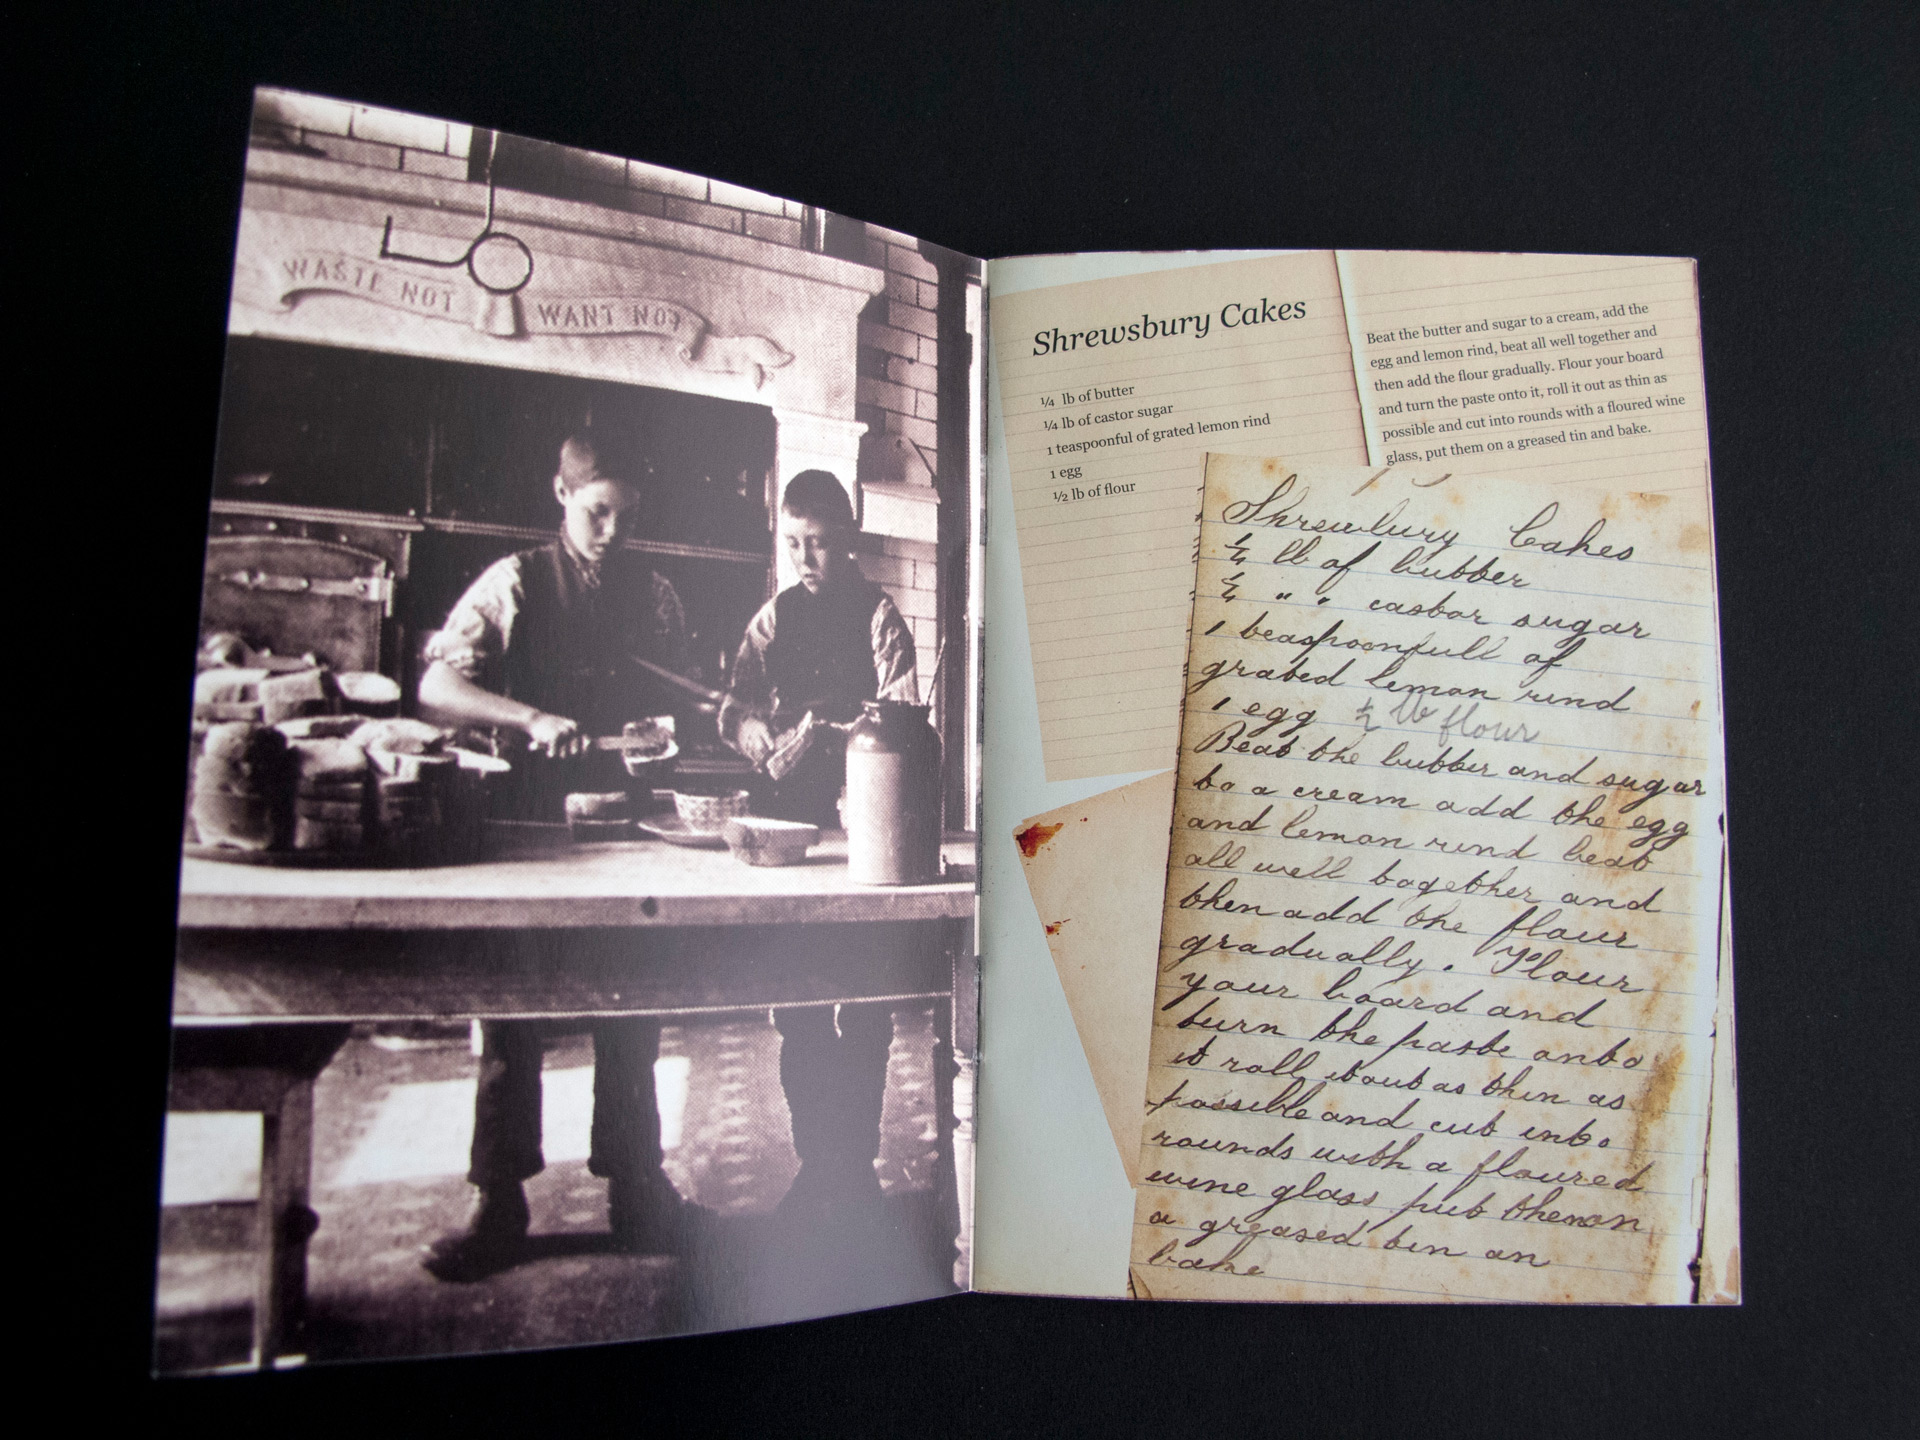 A photo of a double-page spread in the tea room brochure. A black-and-white Victorian photograph of two boys working in a kitchen is on the left-hand page. The right-hand page depicts a collage of lined notepaper and handwritten recipes.